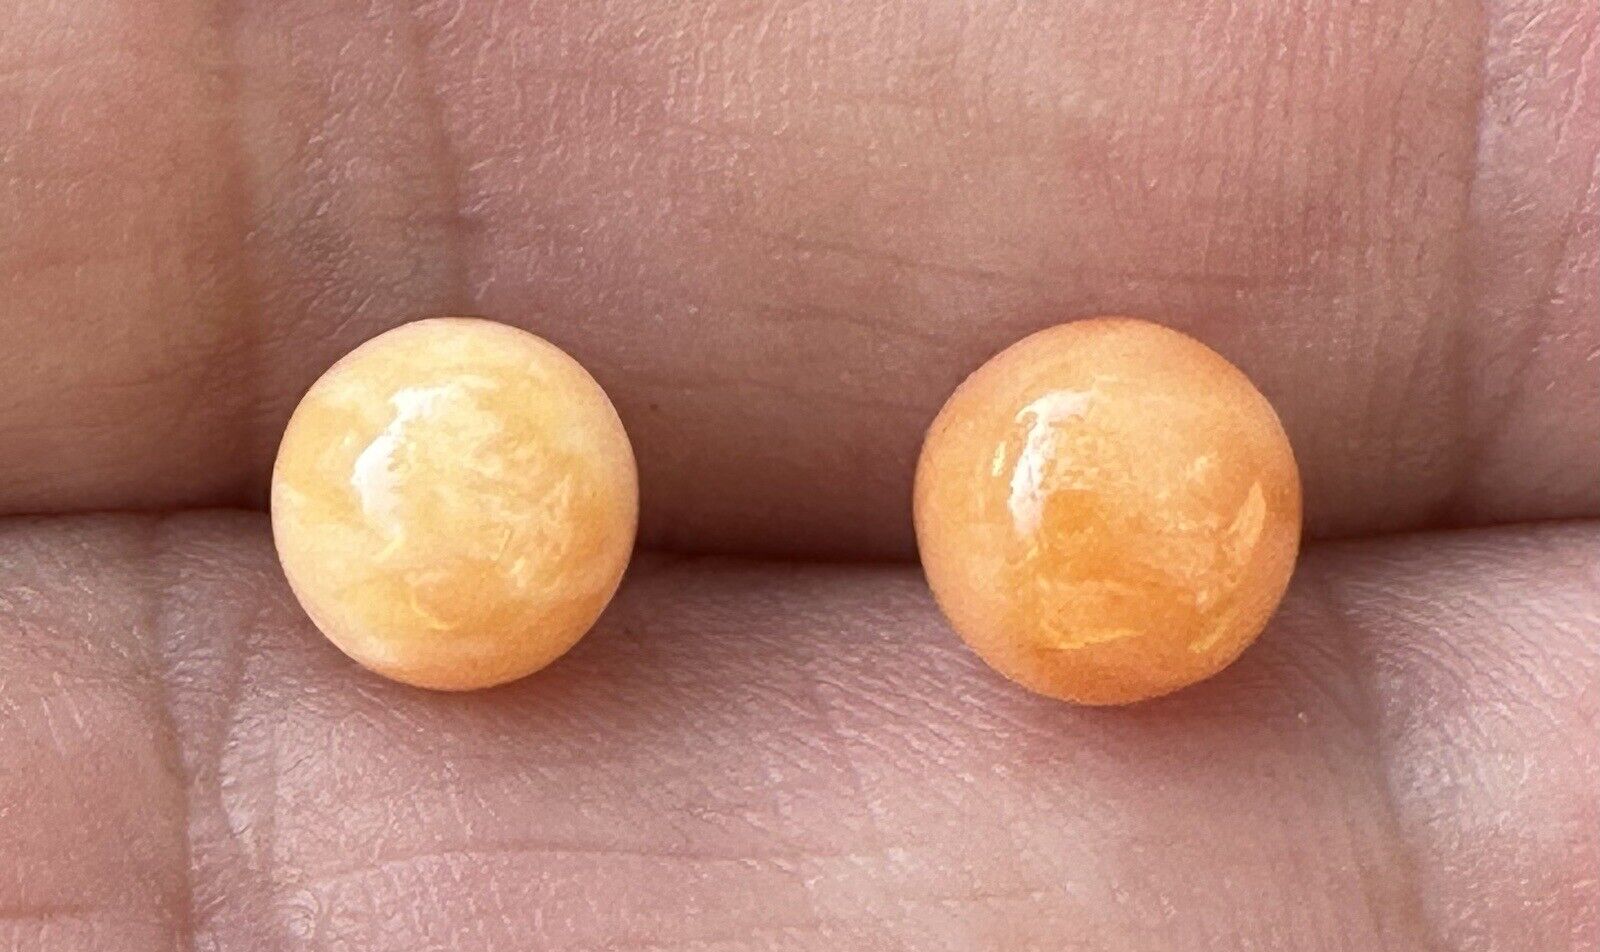 An Exquisite 7mm Melo Pearl Pair 5.65ct